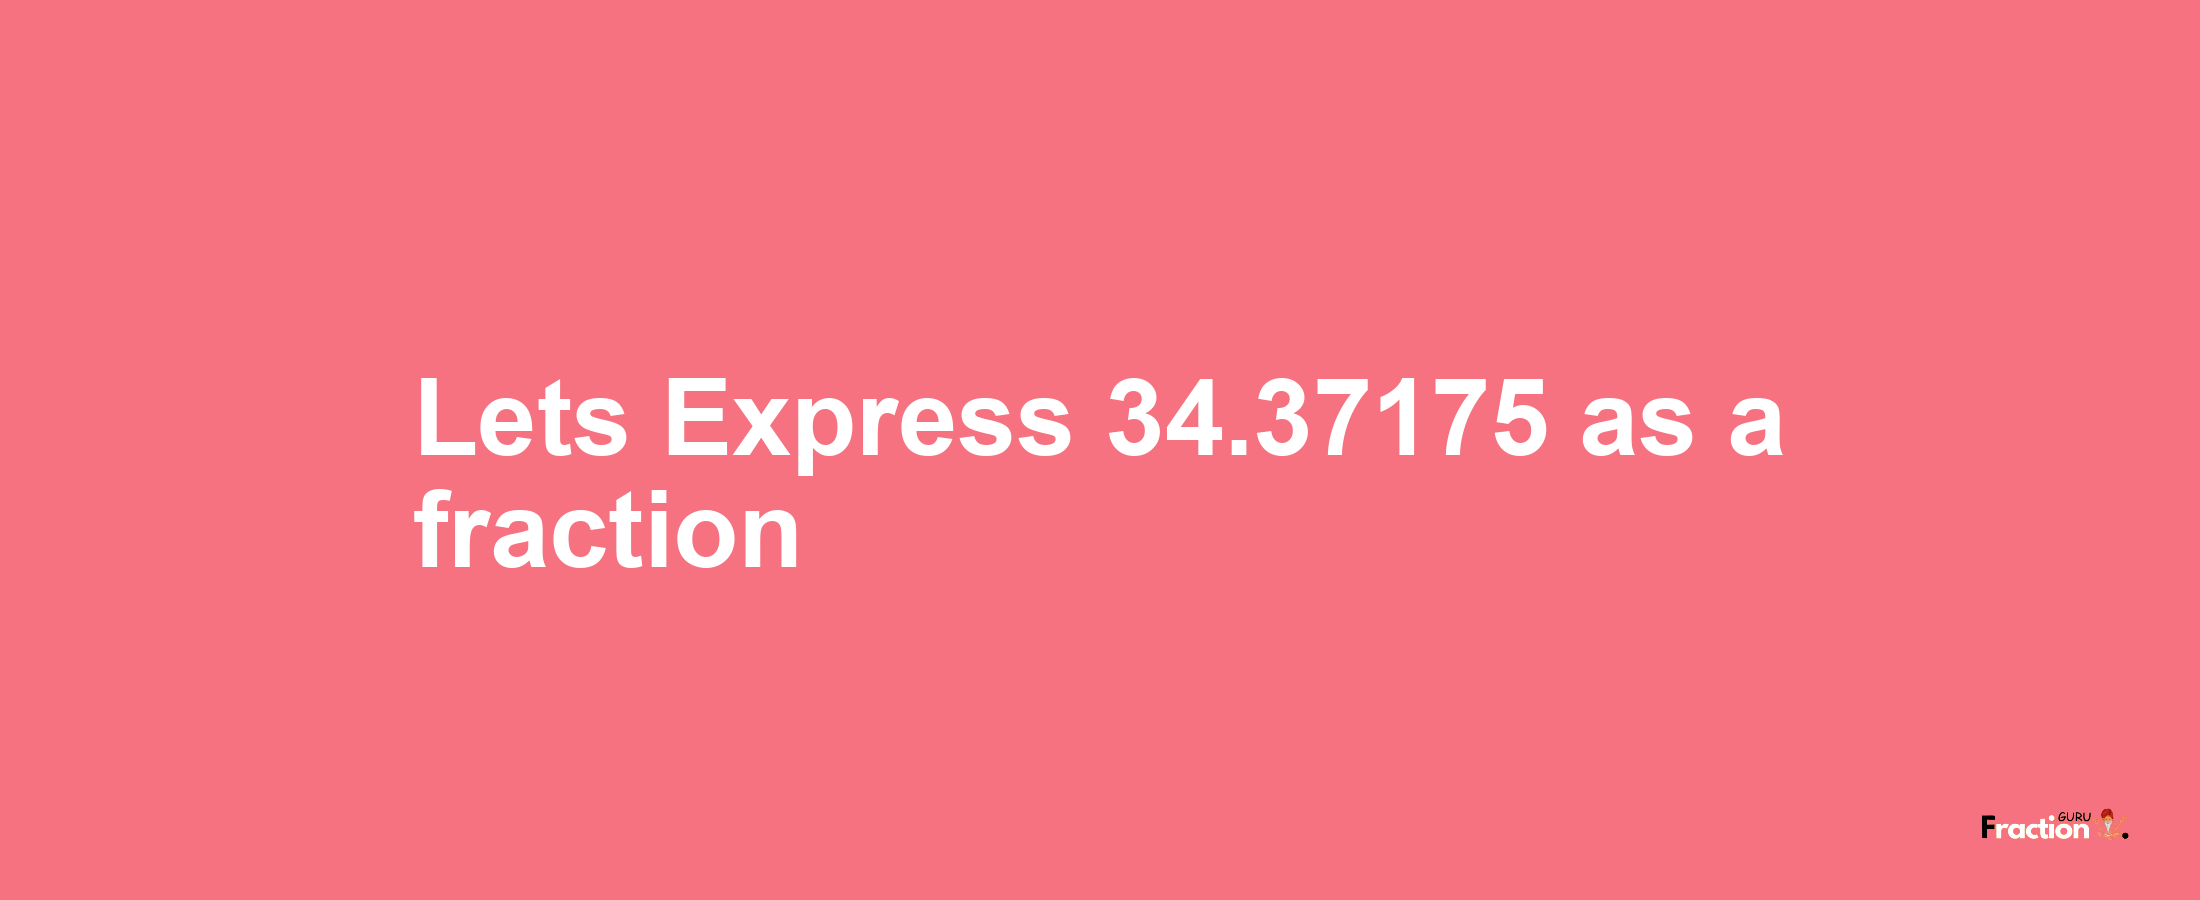 Lets Express 34.37175 as afraction